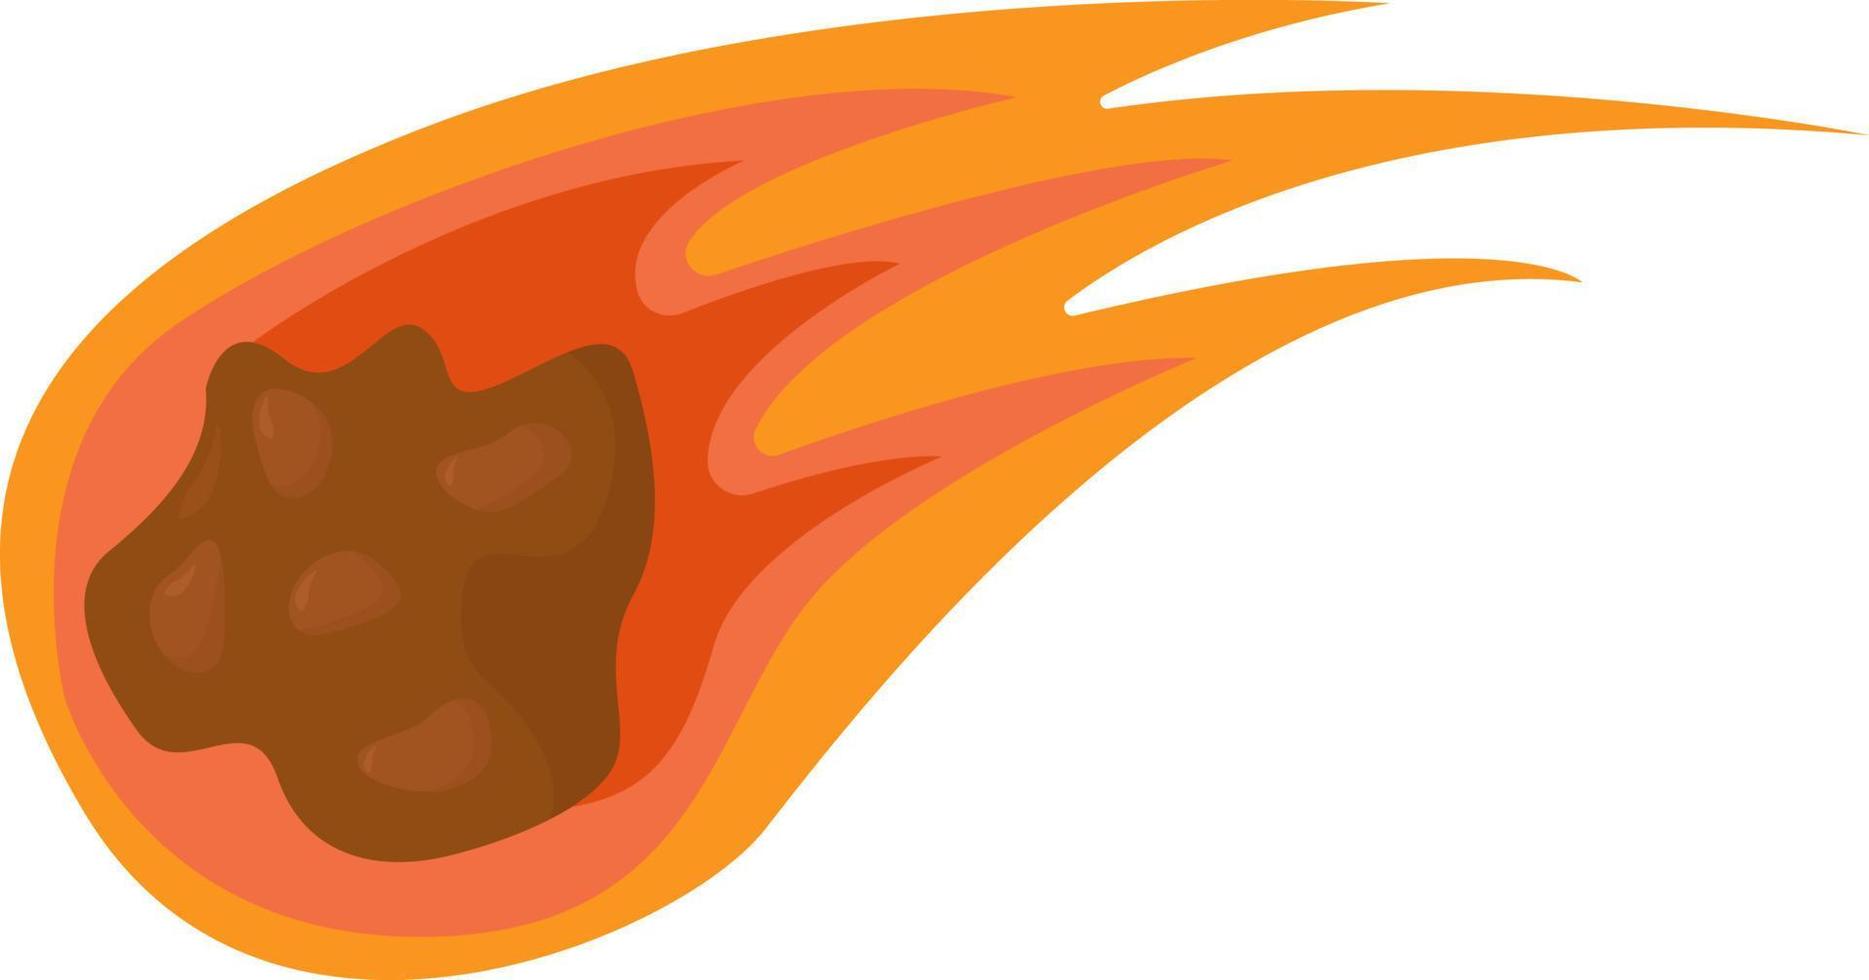 Fire comet ,illustration,vector on white background vector